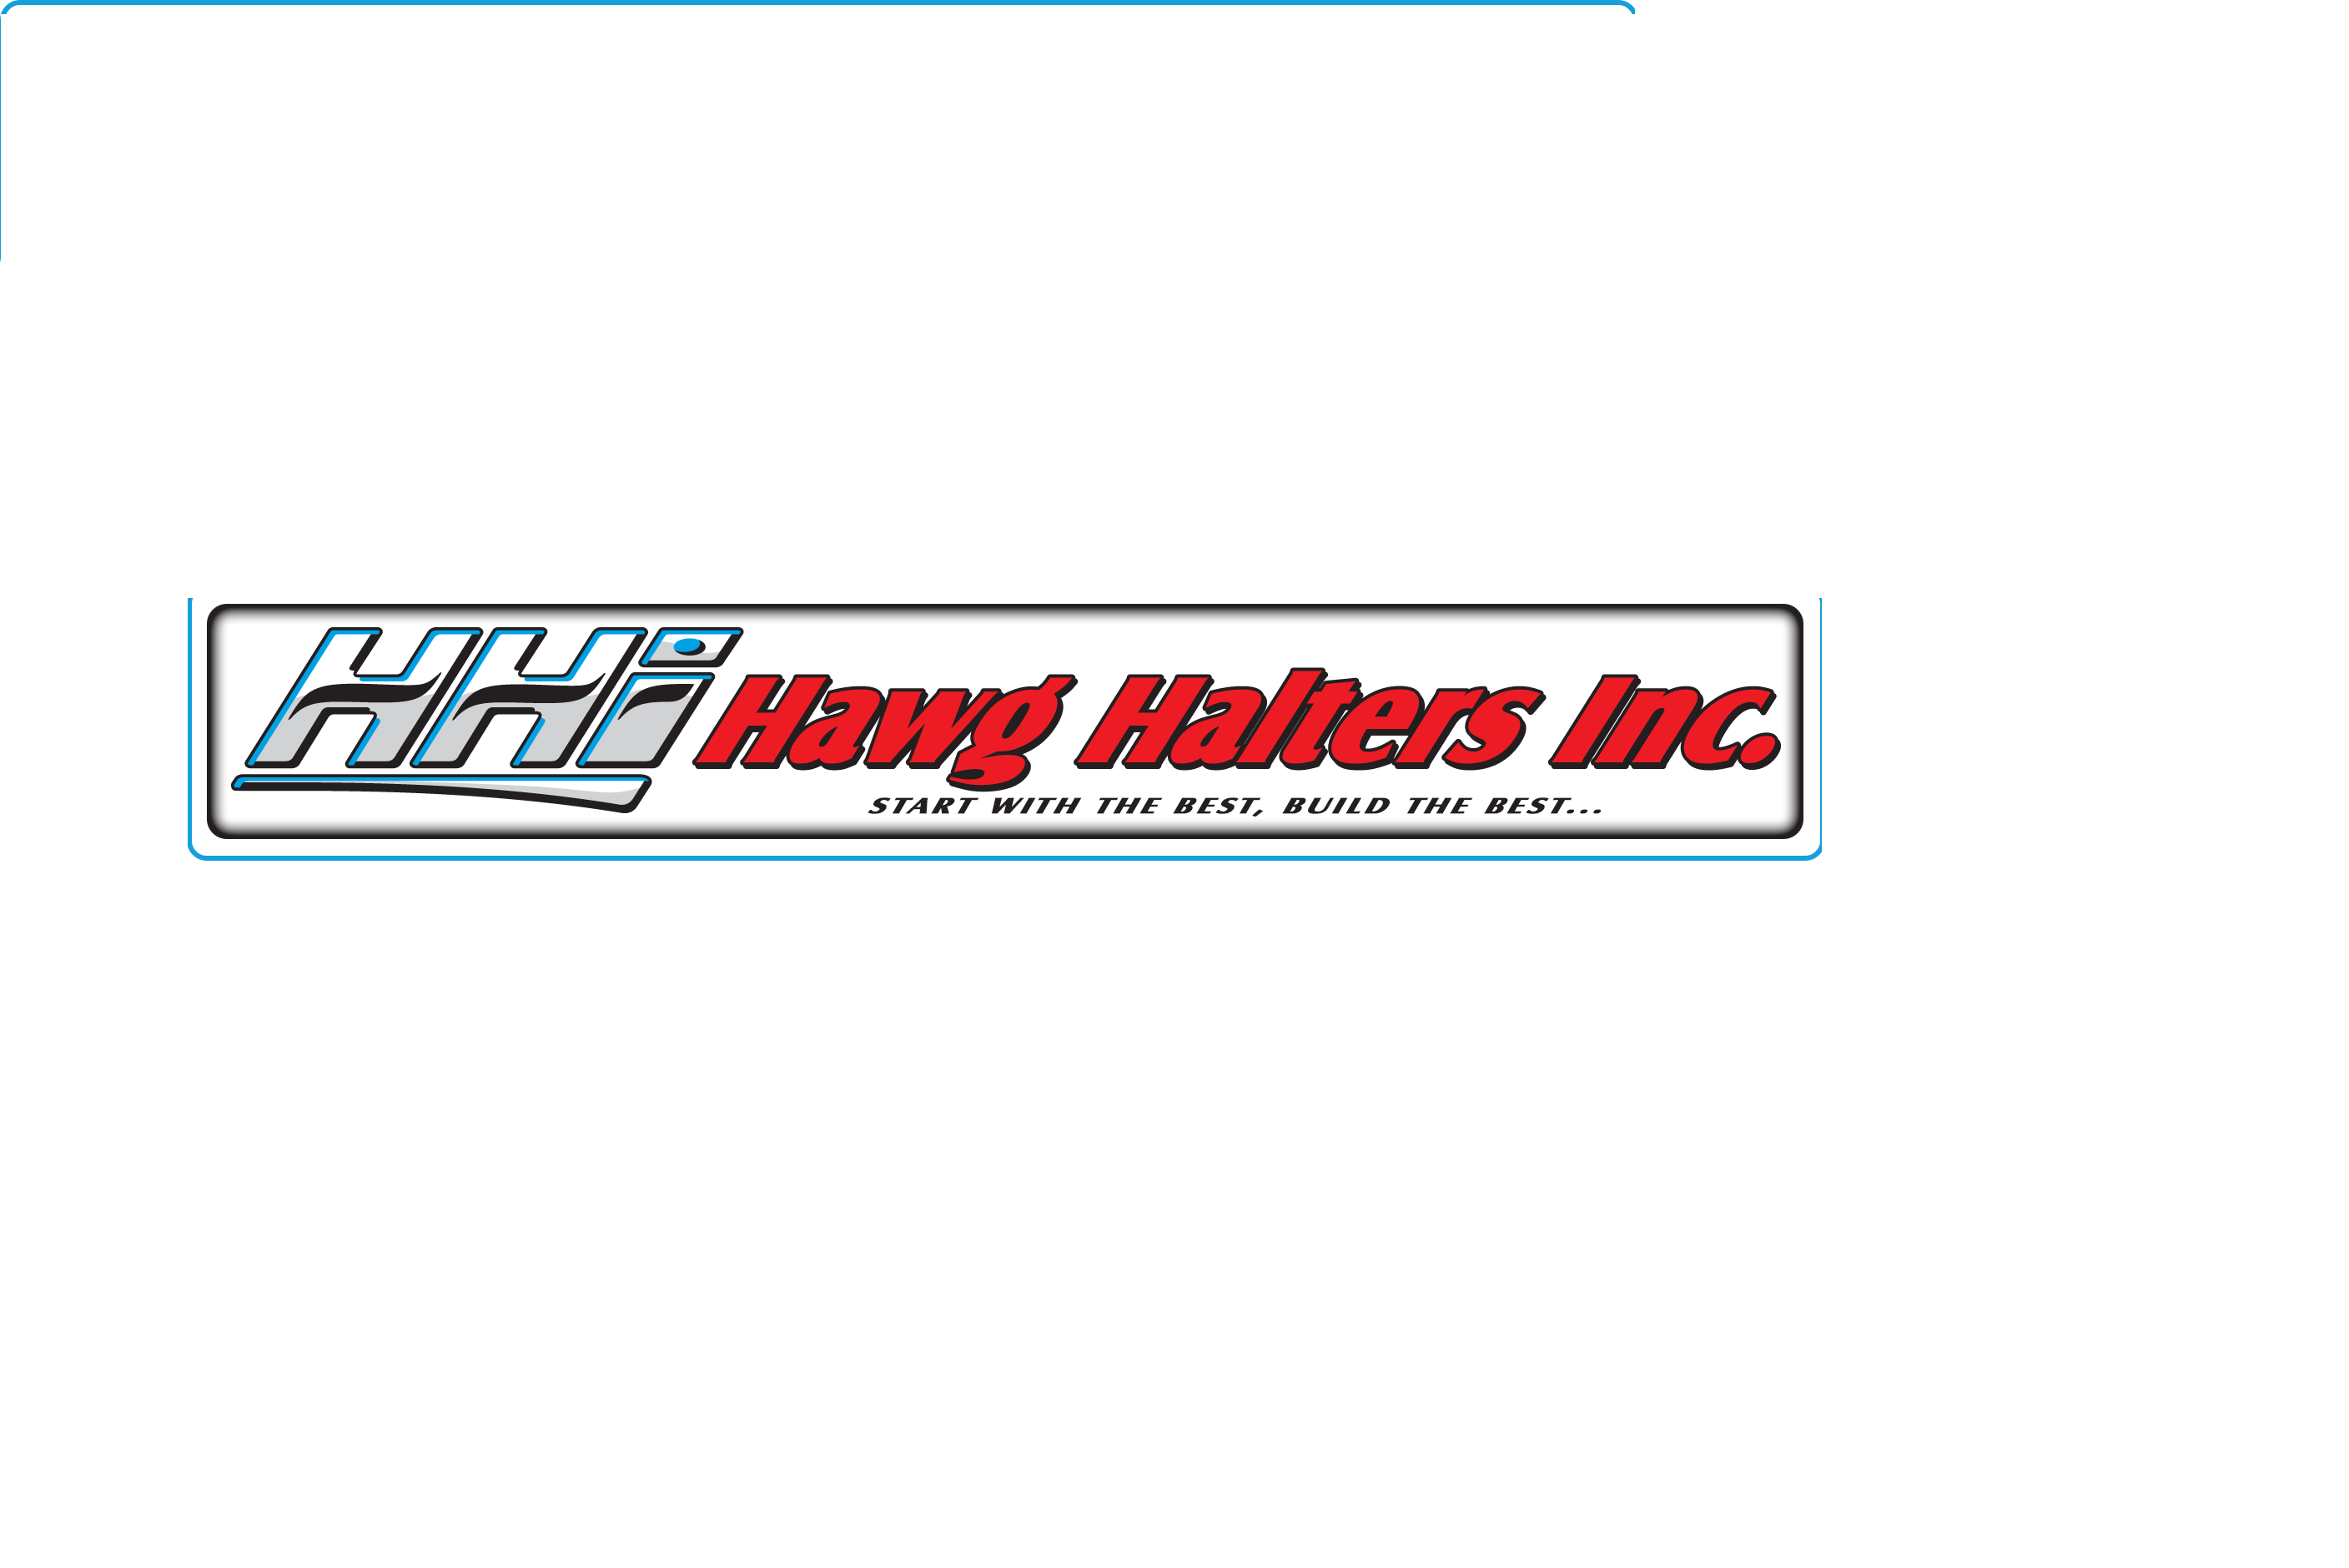 Business logo of Hawg Halters Inc